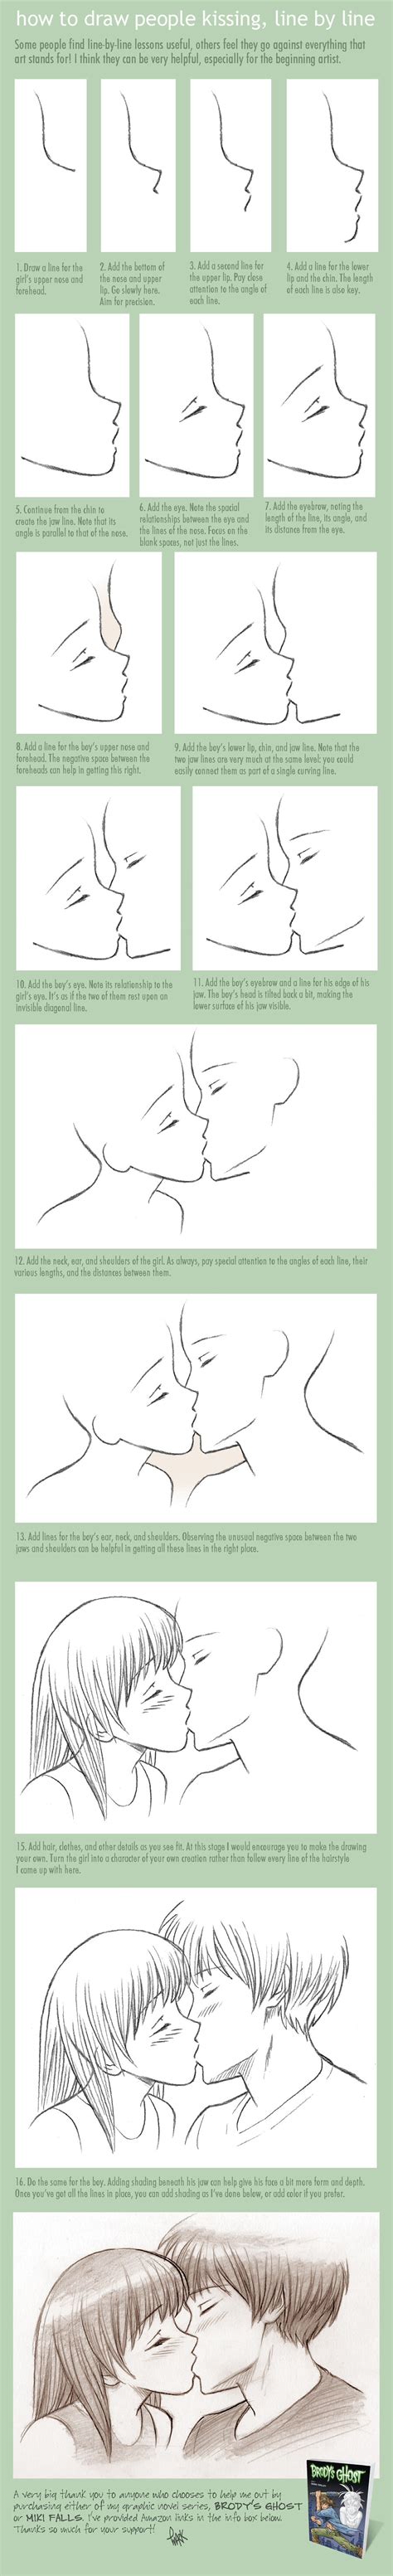 How To Draw People Kissing Anime Image Result For Anime Chibi Couple